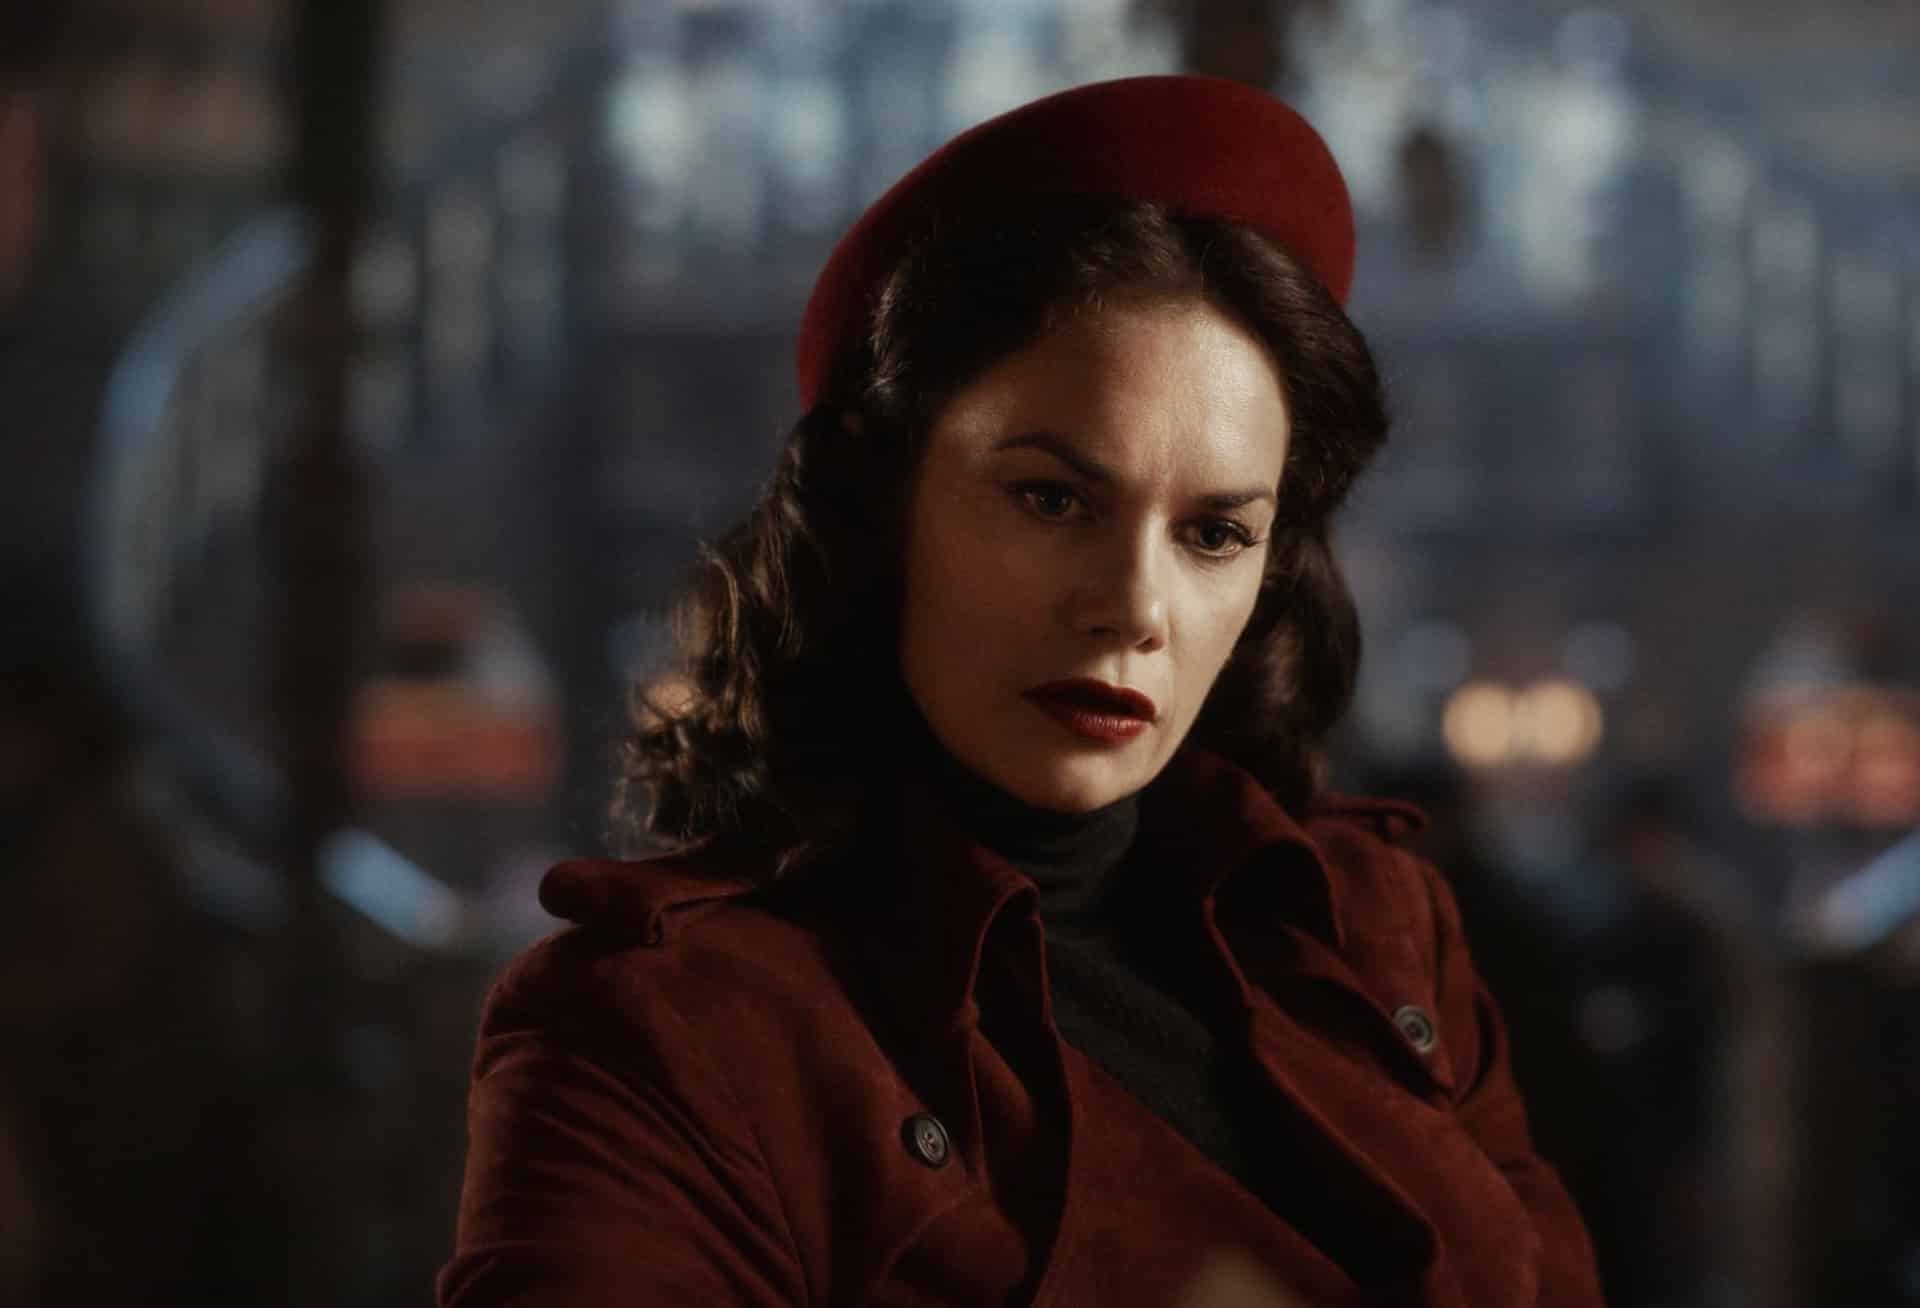 his-dark-materials-mrs-coulter-character-wearing-red-beret-and-red-suit